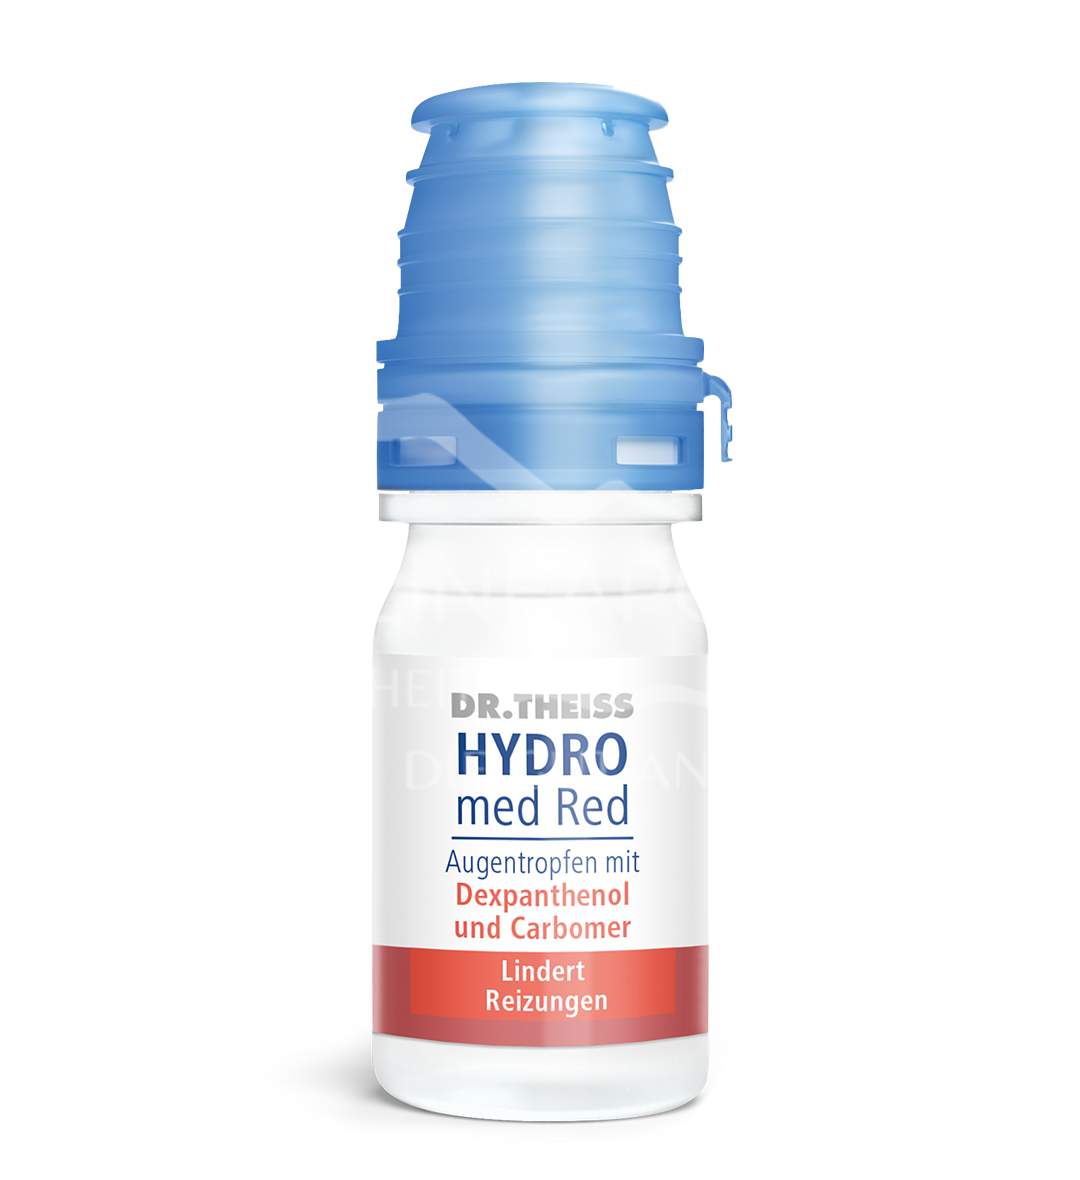 Dr. Theiss HYDRO med Red Augentropfen